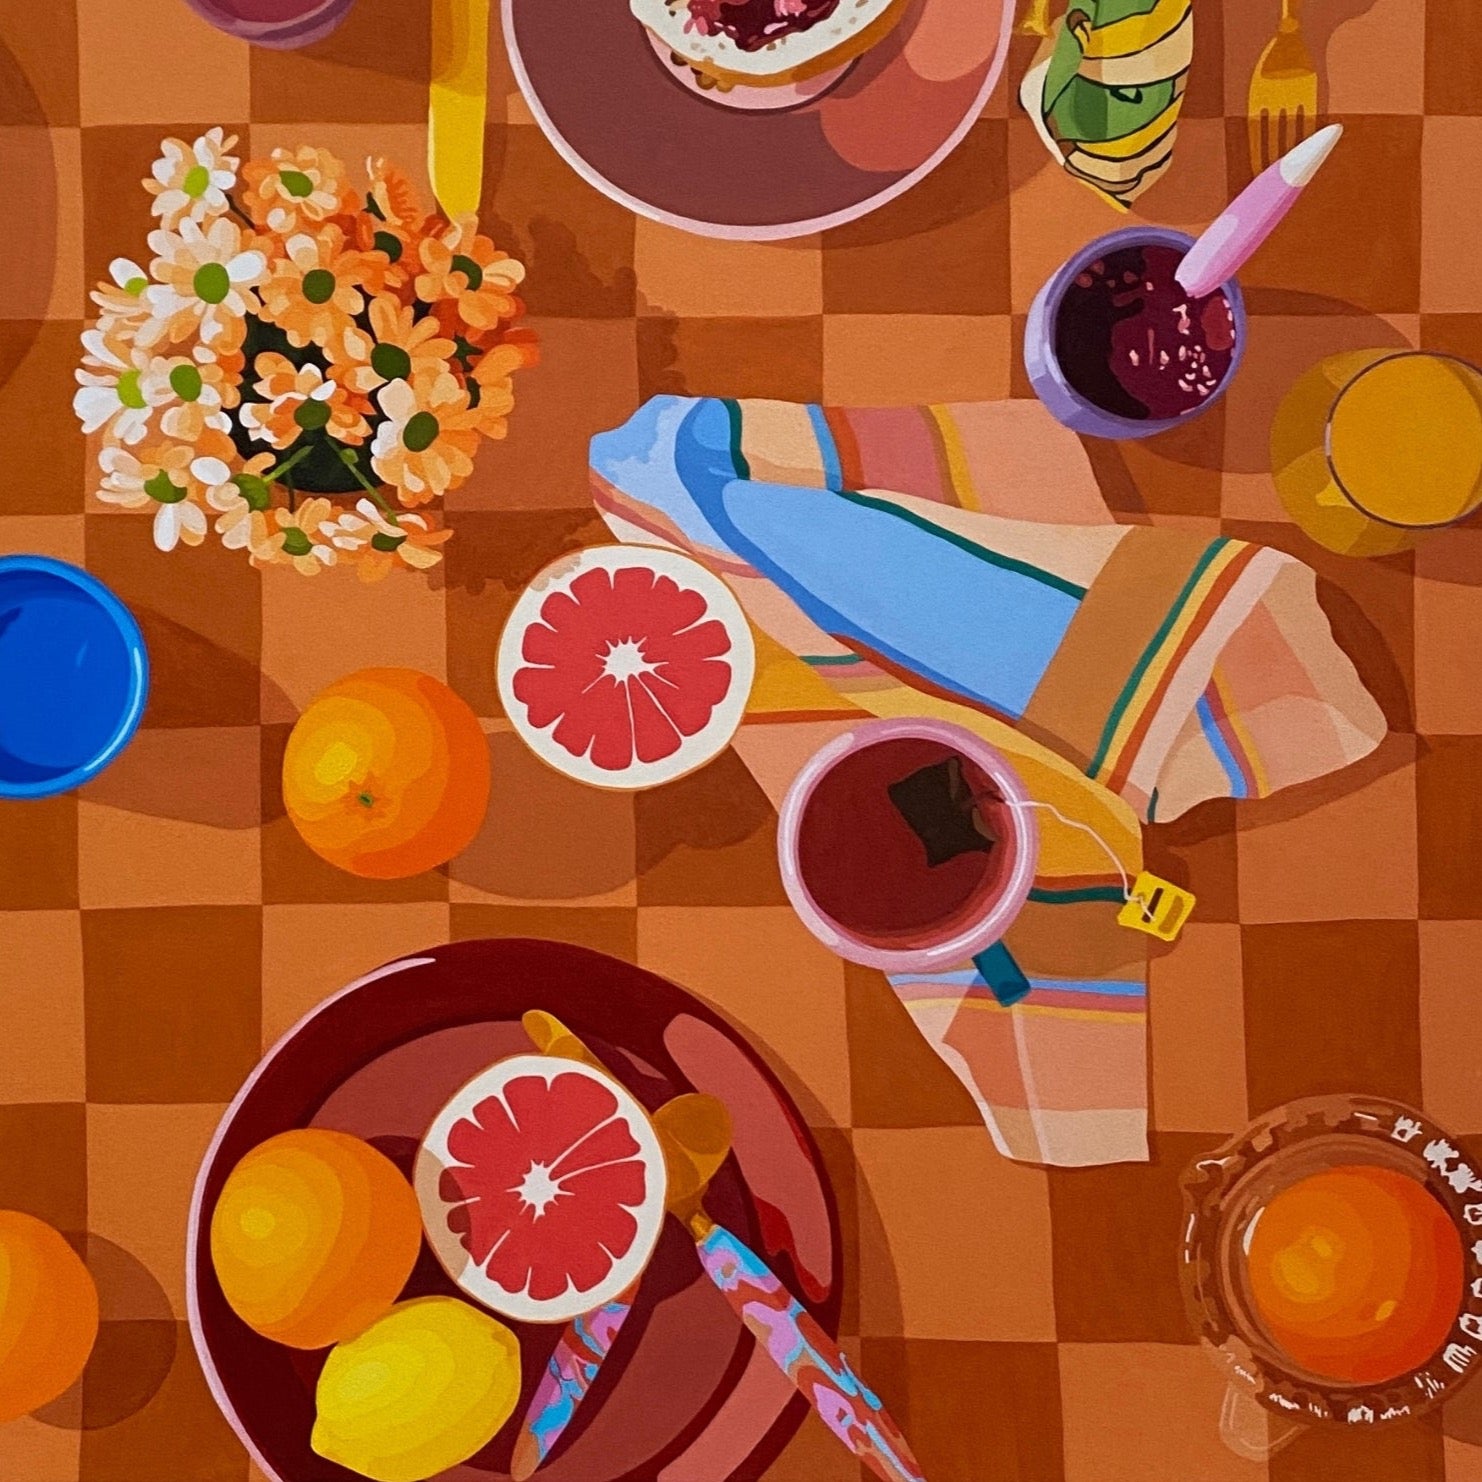 closeup photo of a fine art print of a breakfast setup with oranges, lemons, tea towels, cutlery by kip and co, and flowers and cups on a chequered tablecloth background